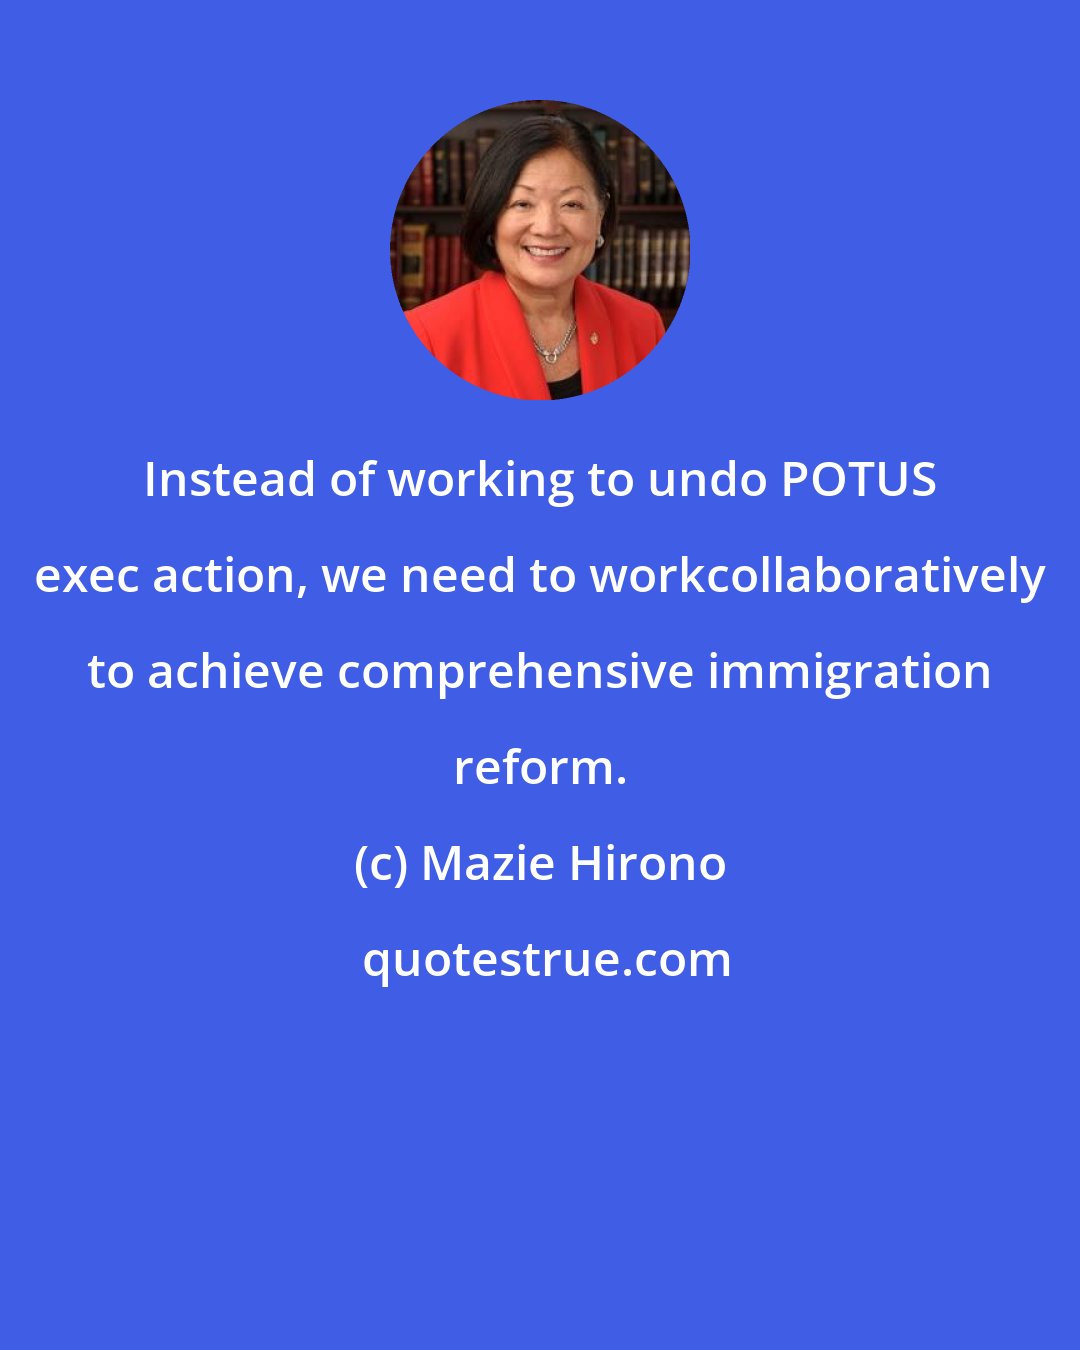 Mazie Hirono: Instead of working to undo POTUS exec action, we need to workcollaboratively to achieve comprehensive immigration reform.